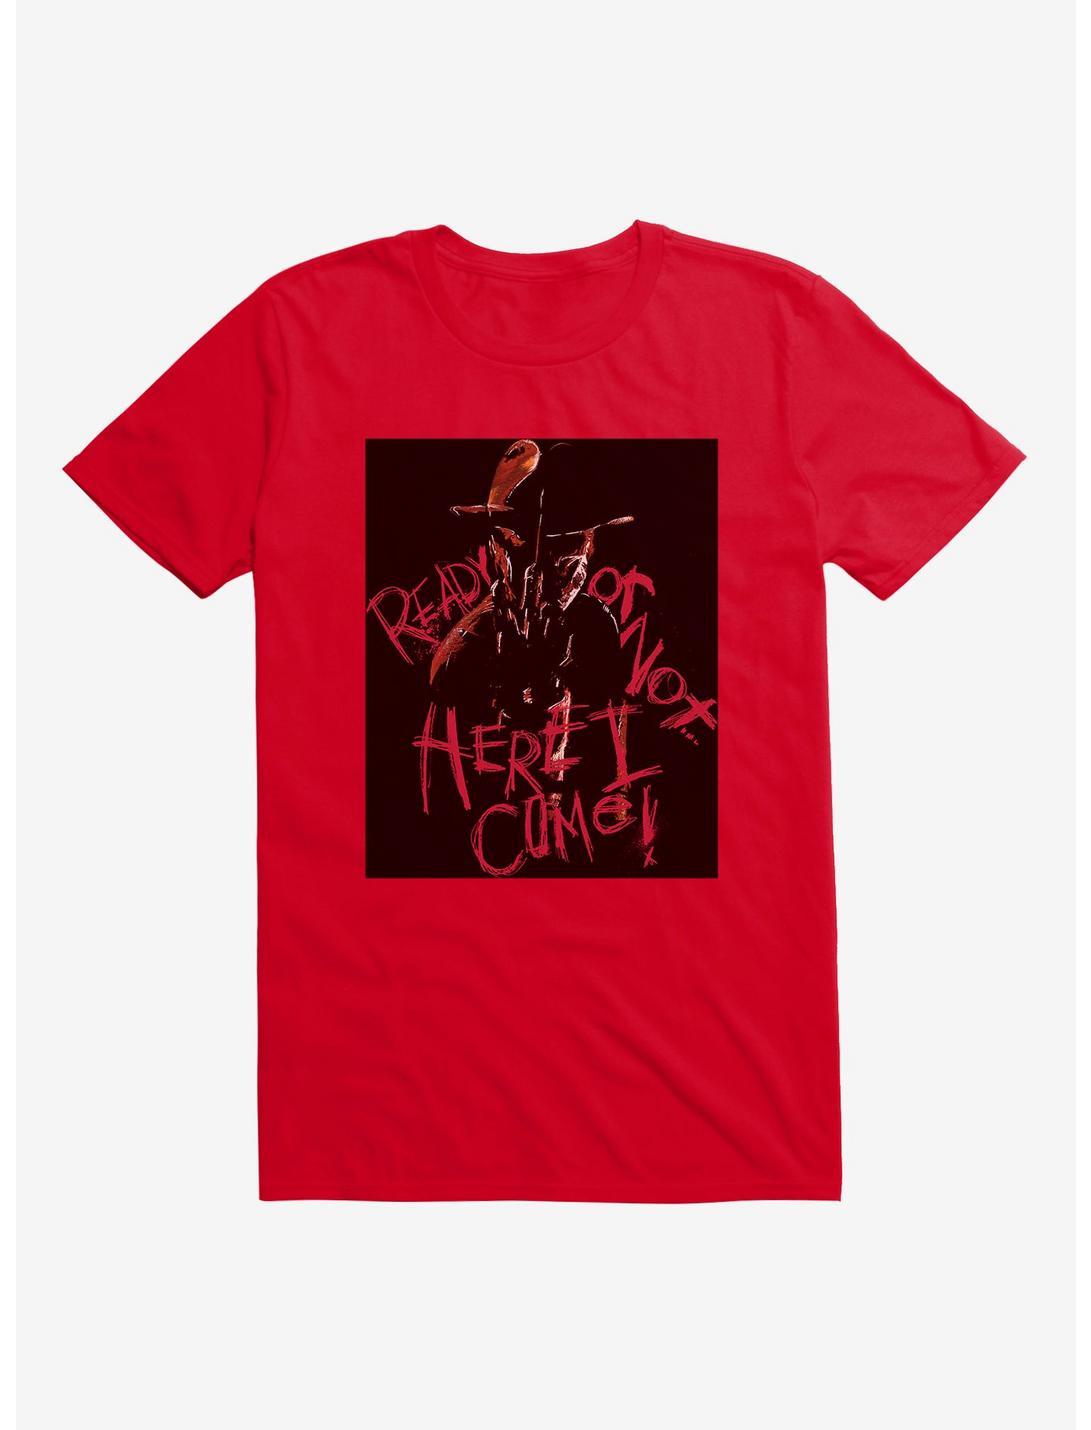 A Nightmare On Elm Street Ready Or Not T-Shirt, RED, hi-res